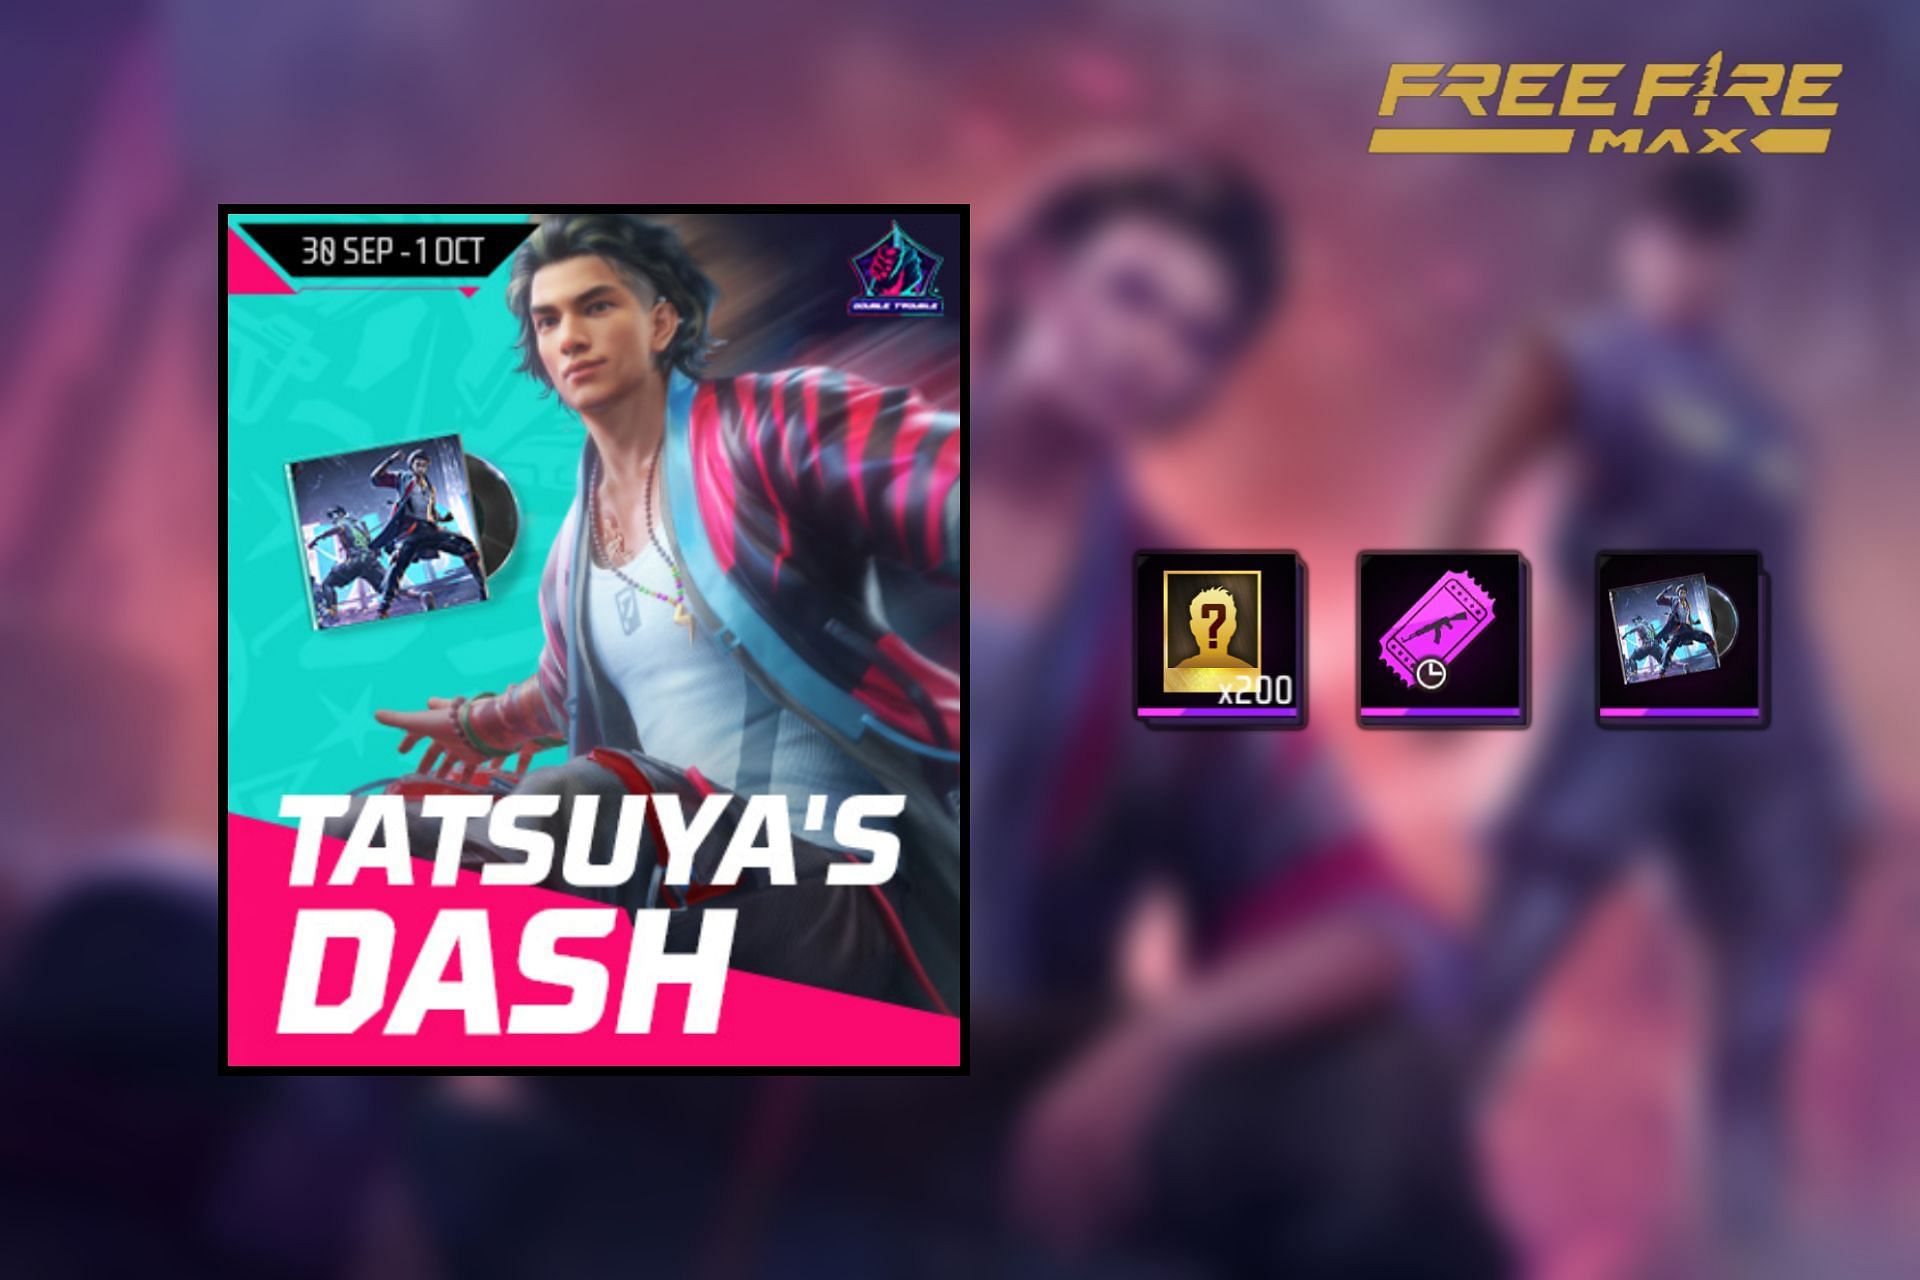 The new event in Free Fire MAX (Image via Sportskeeda)